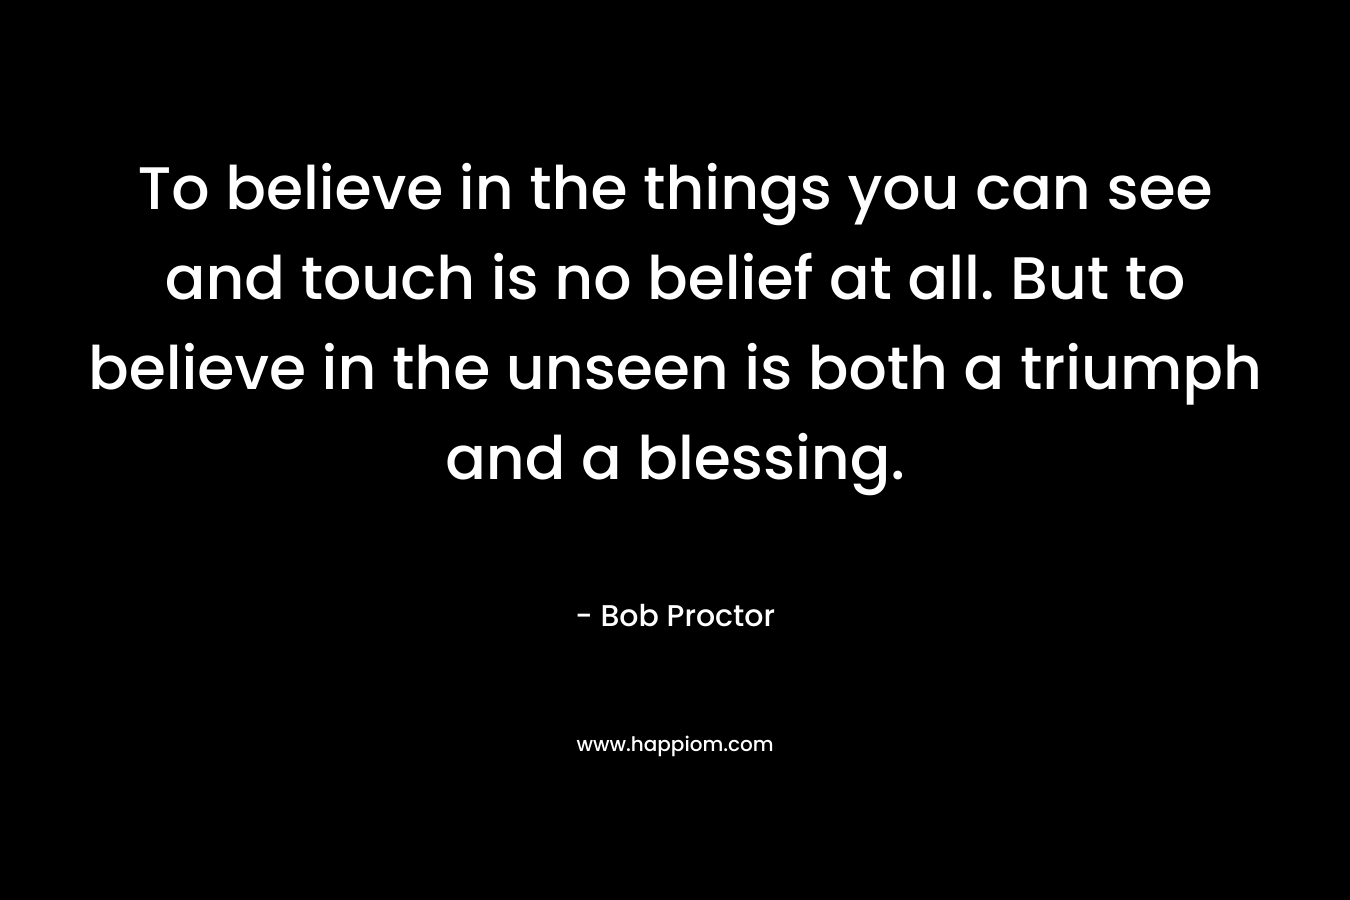 To believe in the things you can see and touch is no belief at all. But to believe in the unseen is both a triumph and a blessing.